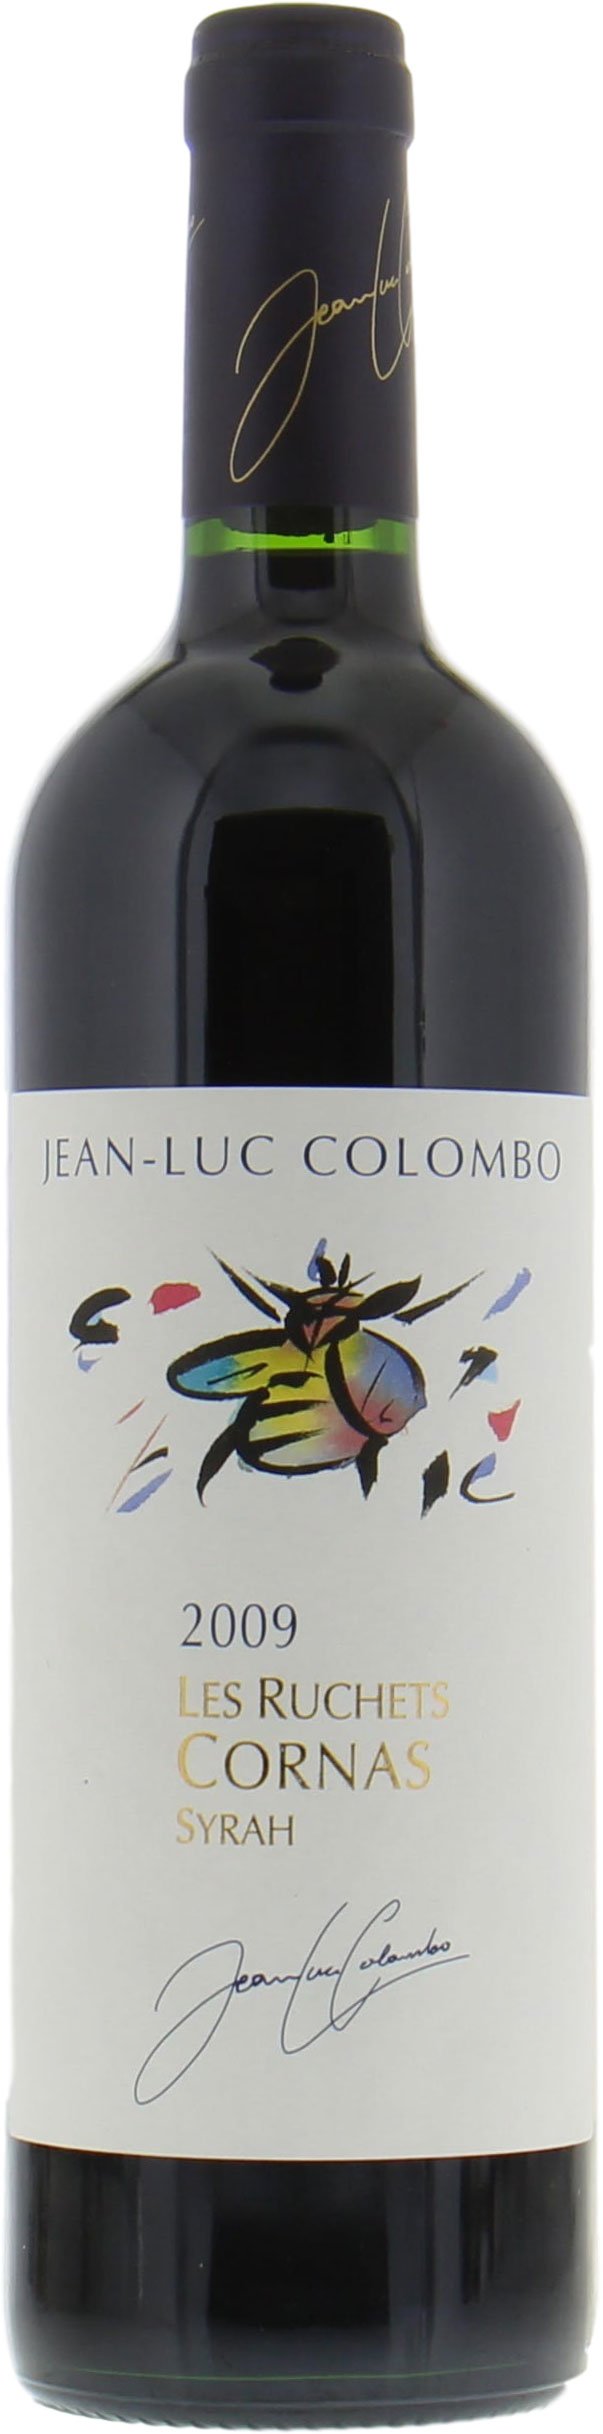 Jean-Luc Colombo - Cornas Ruchets 2010 From Original Wooden Case